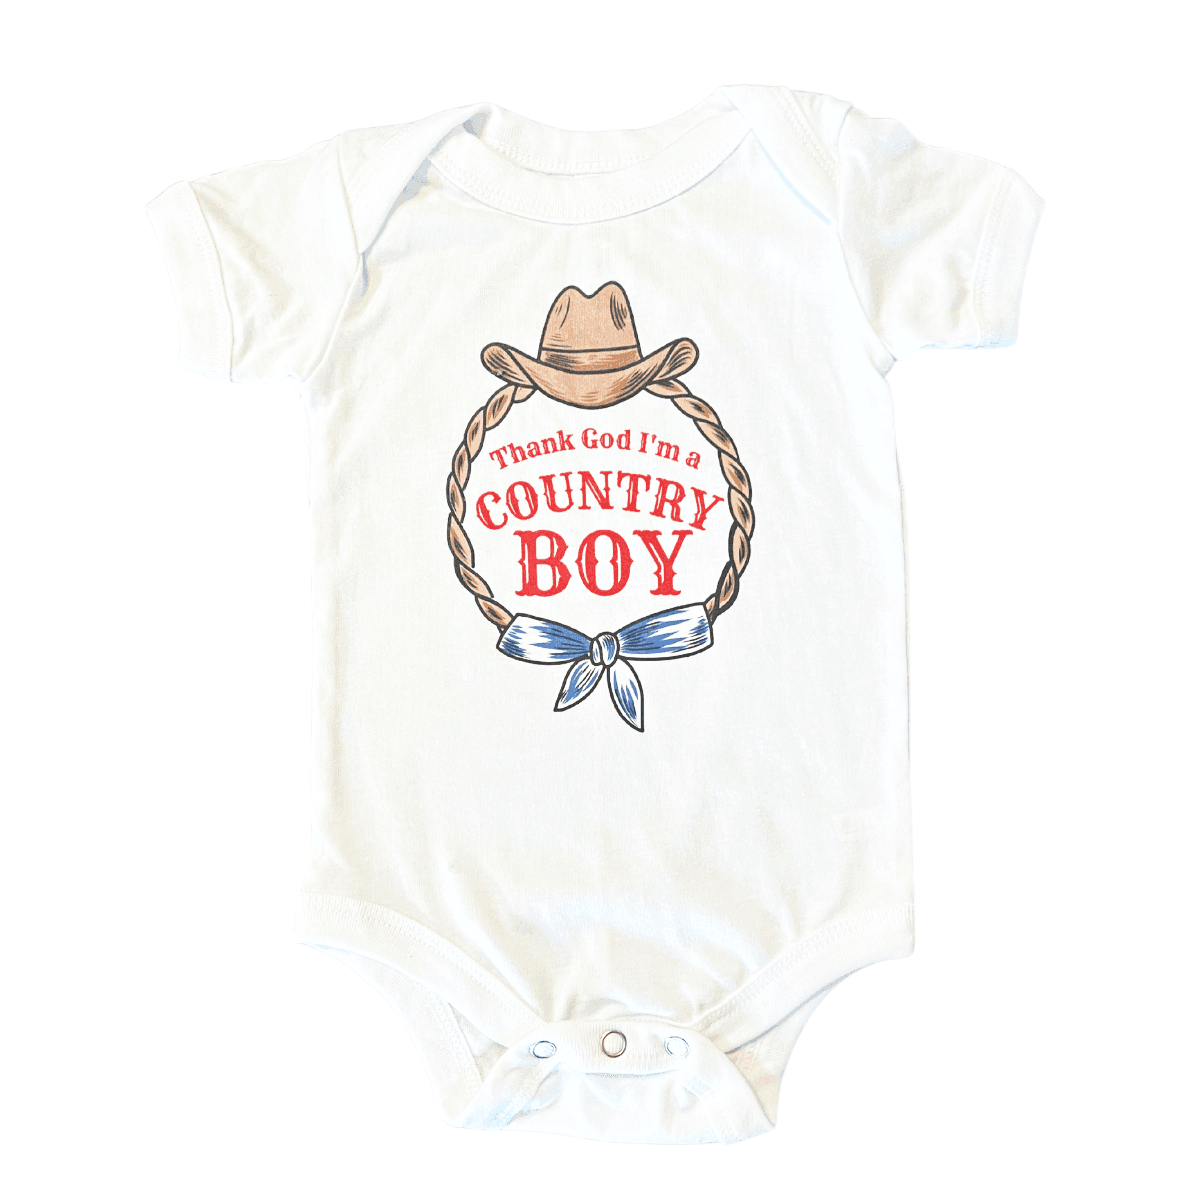 White onesie with "Country Boy" in blue text, featuring a cowboy hat and boots graphic, on a plain background.